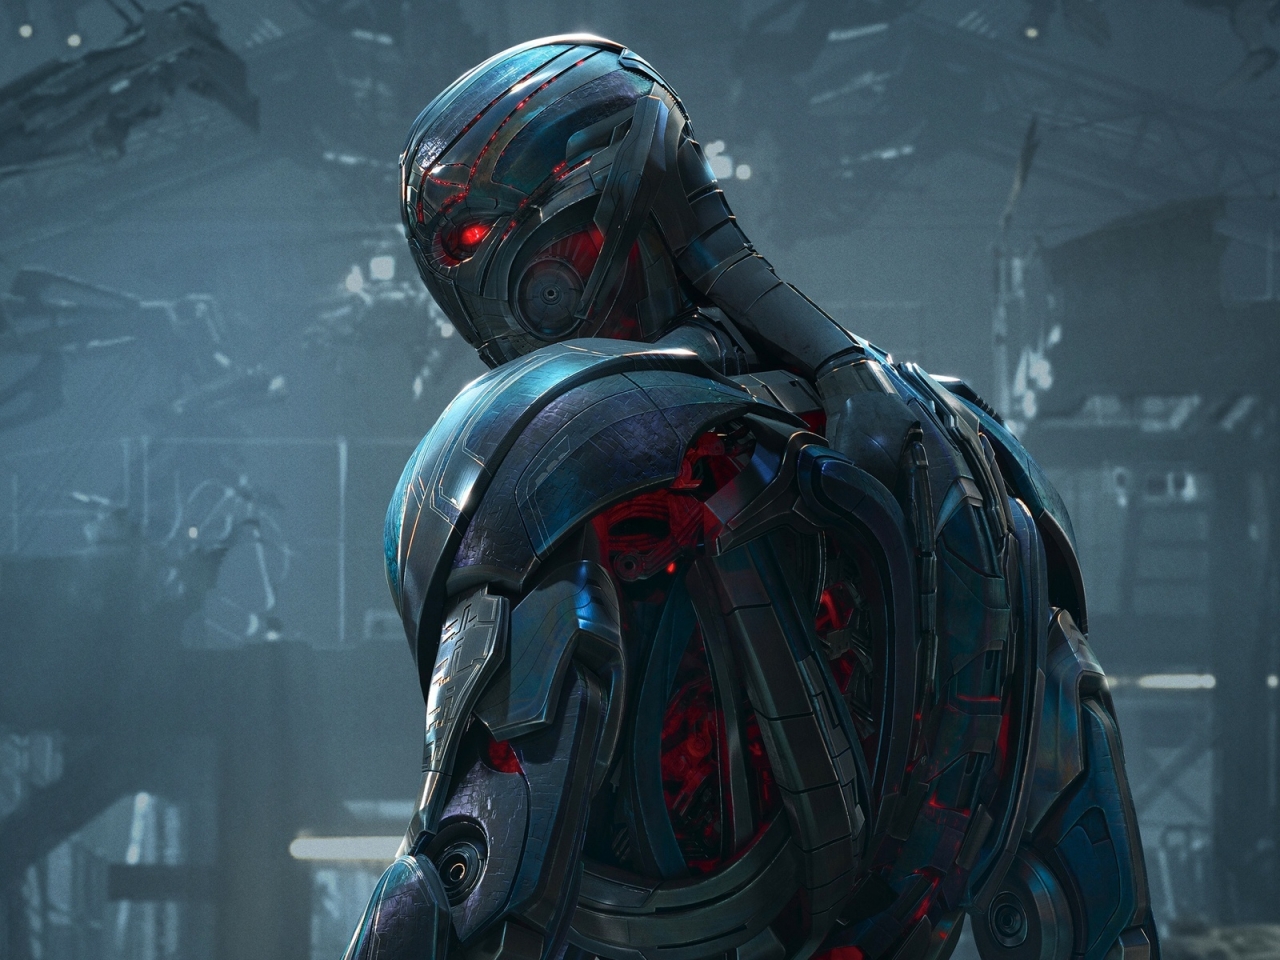 Ultron from Avengers for 1280 x 960 resolution